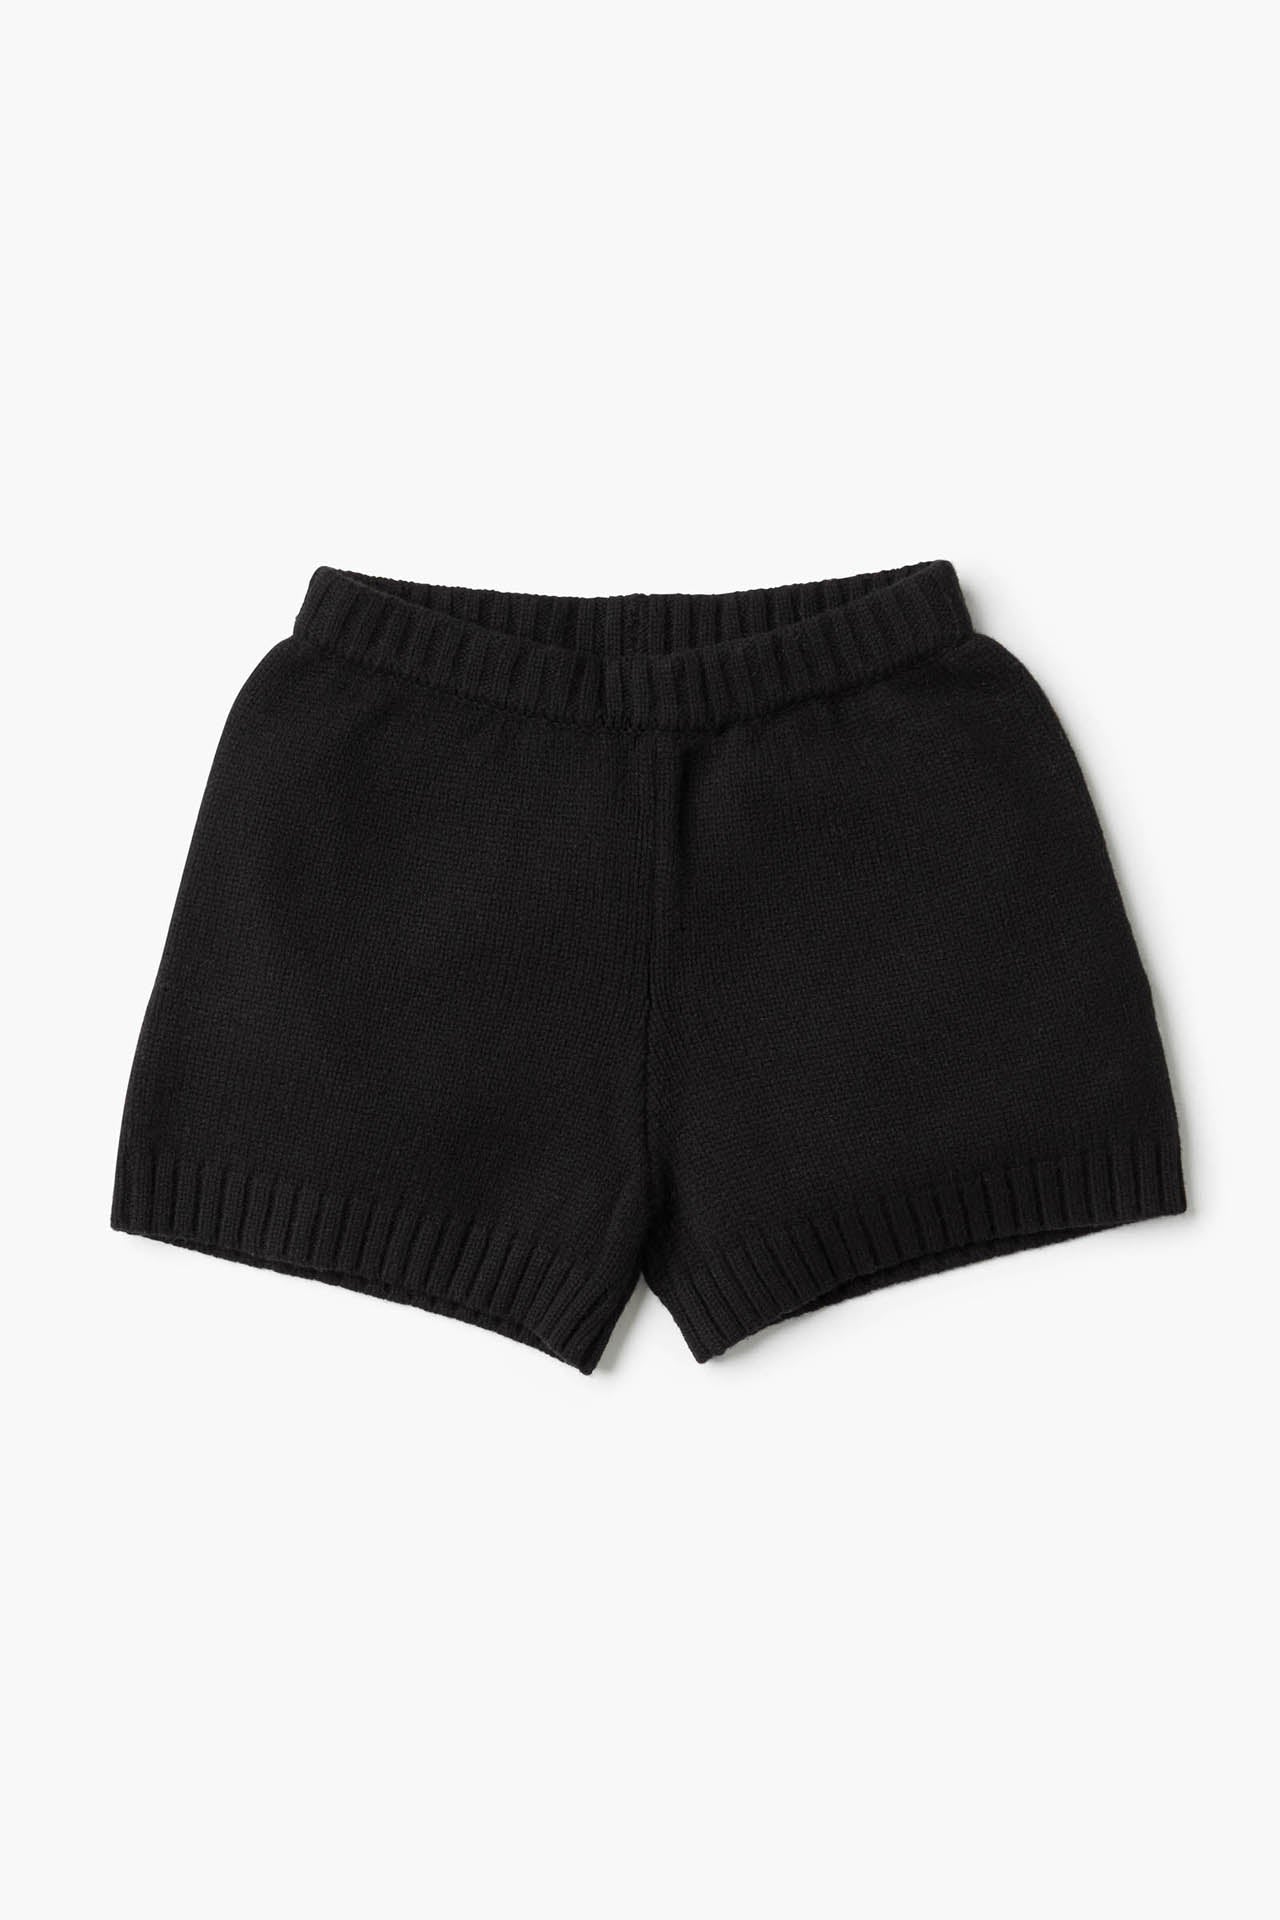 Fitted Knit shorts